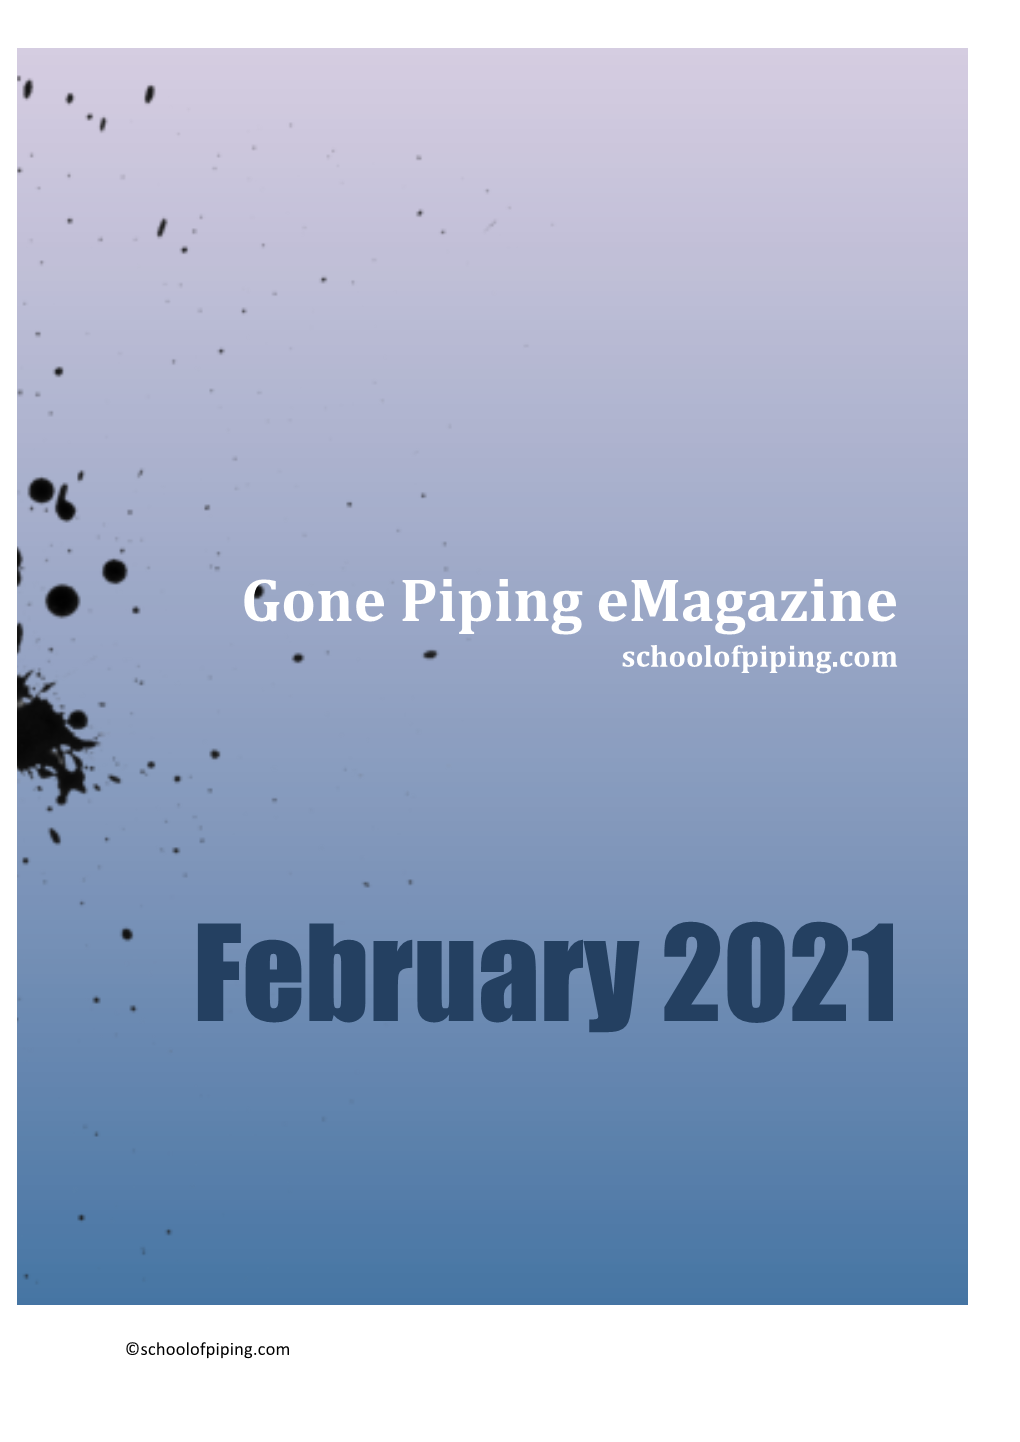 Gone Piping Emagazine Schoolofpiping.Com